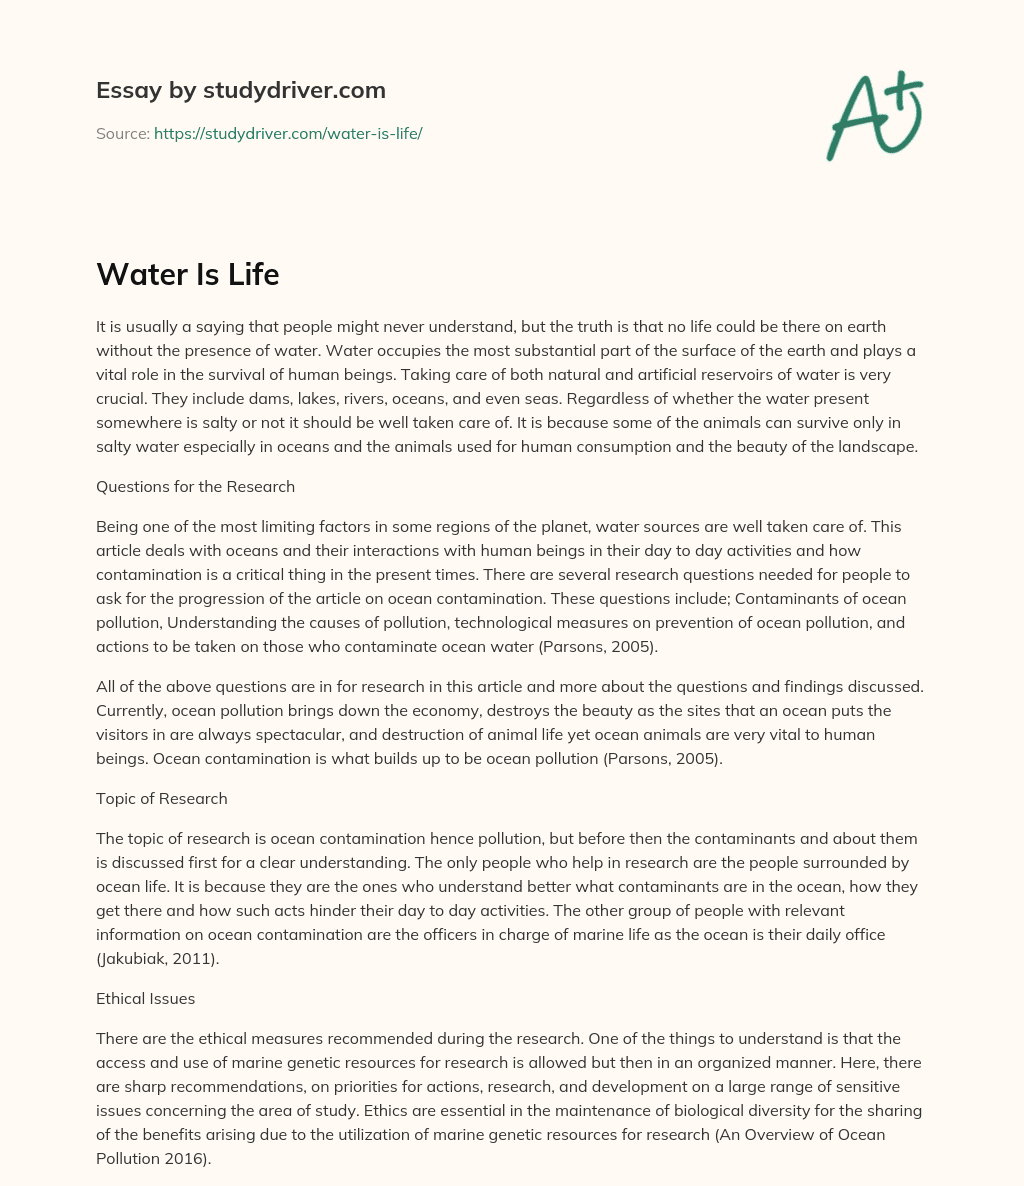 Water is Life essay